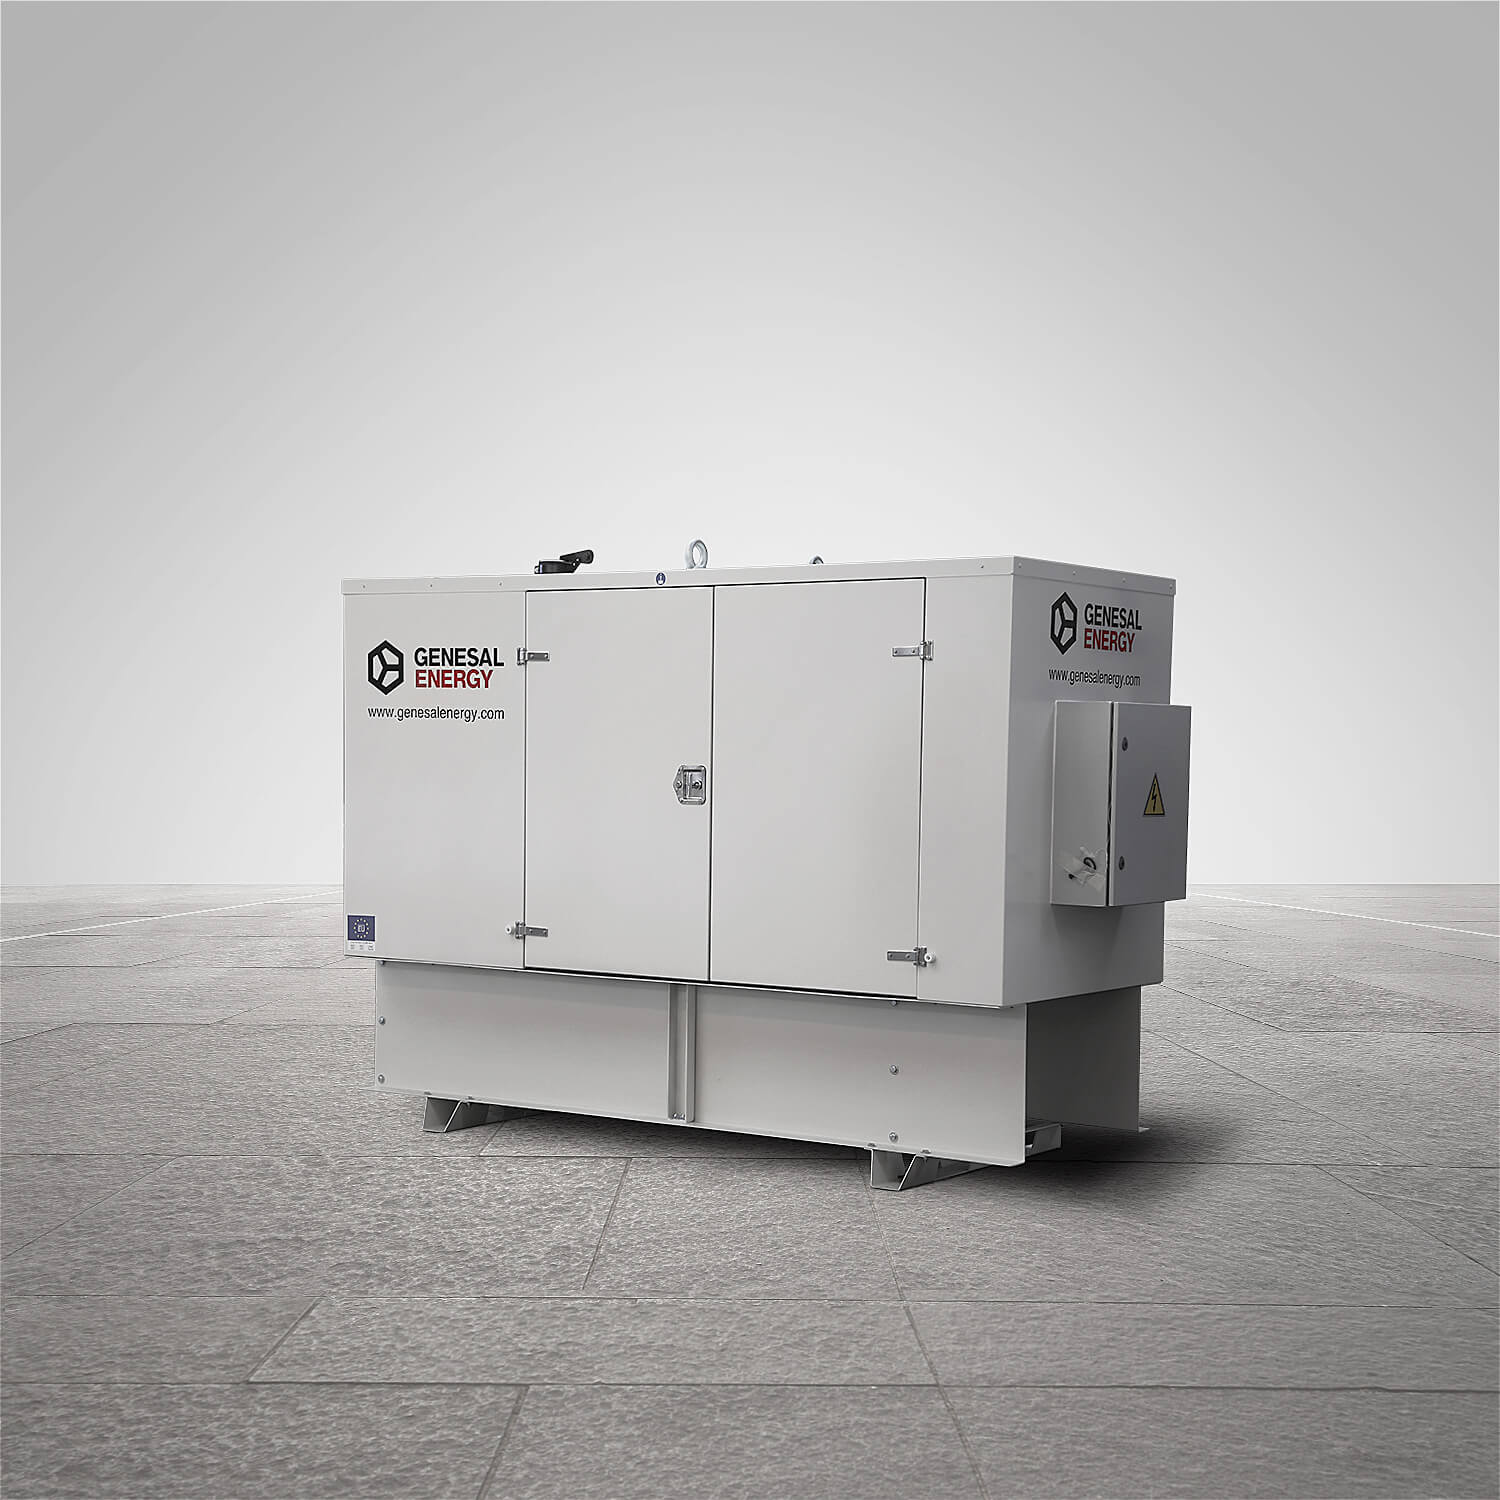 Emergency Generator Set to provide power to a Data Center